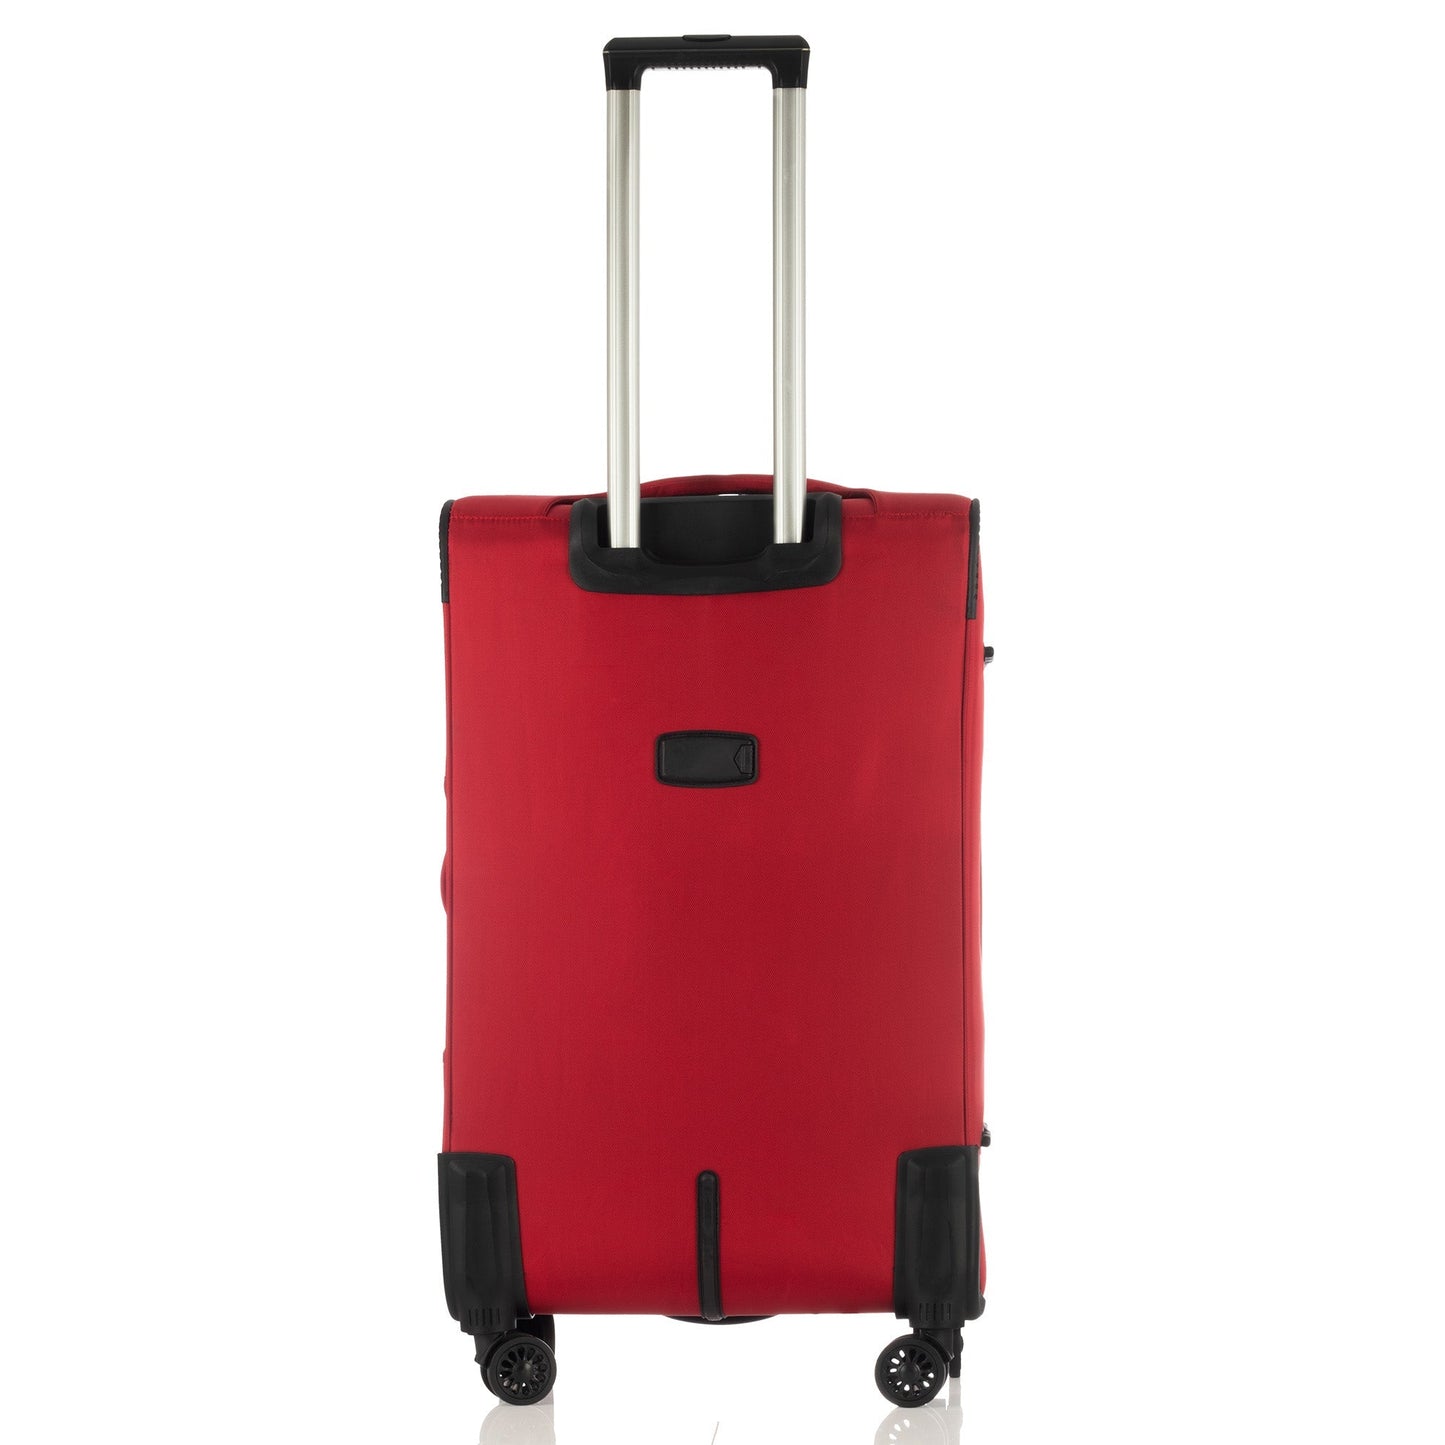 In Heaven Collection Red Luggage (18/20/26/30") Suitcase Lock Spinner Soft